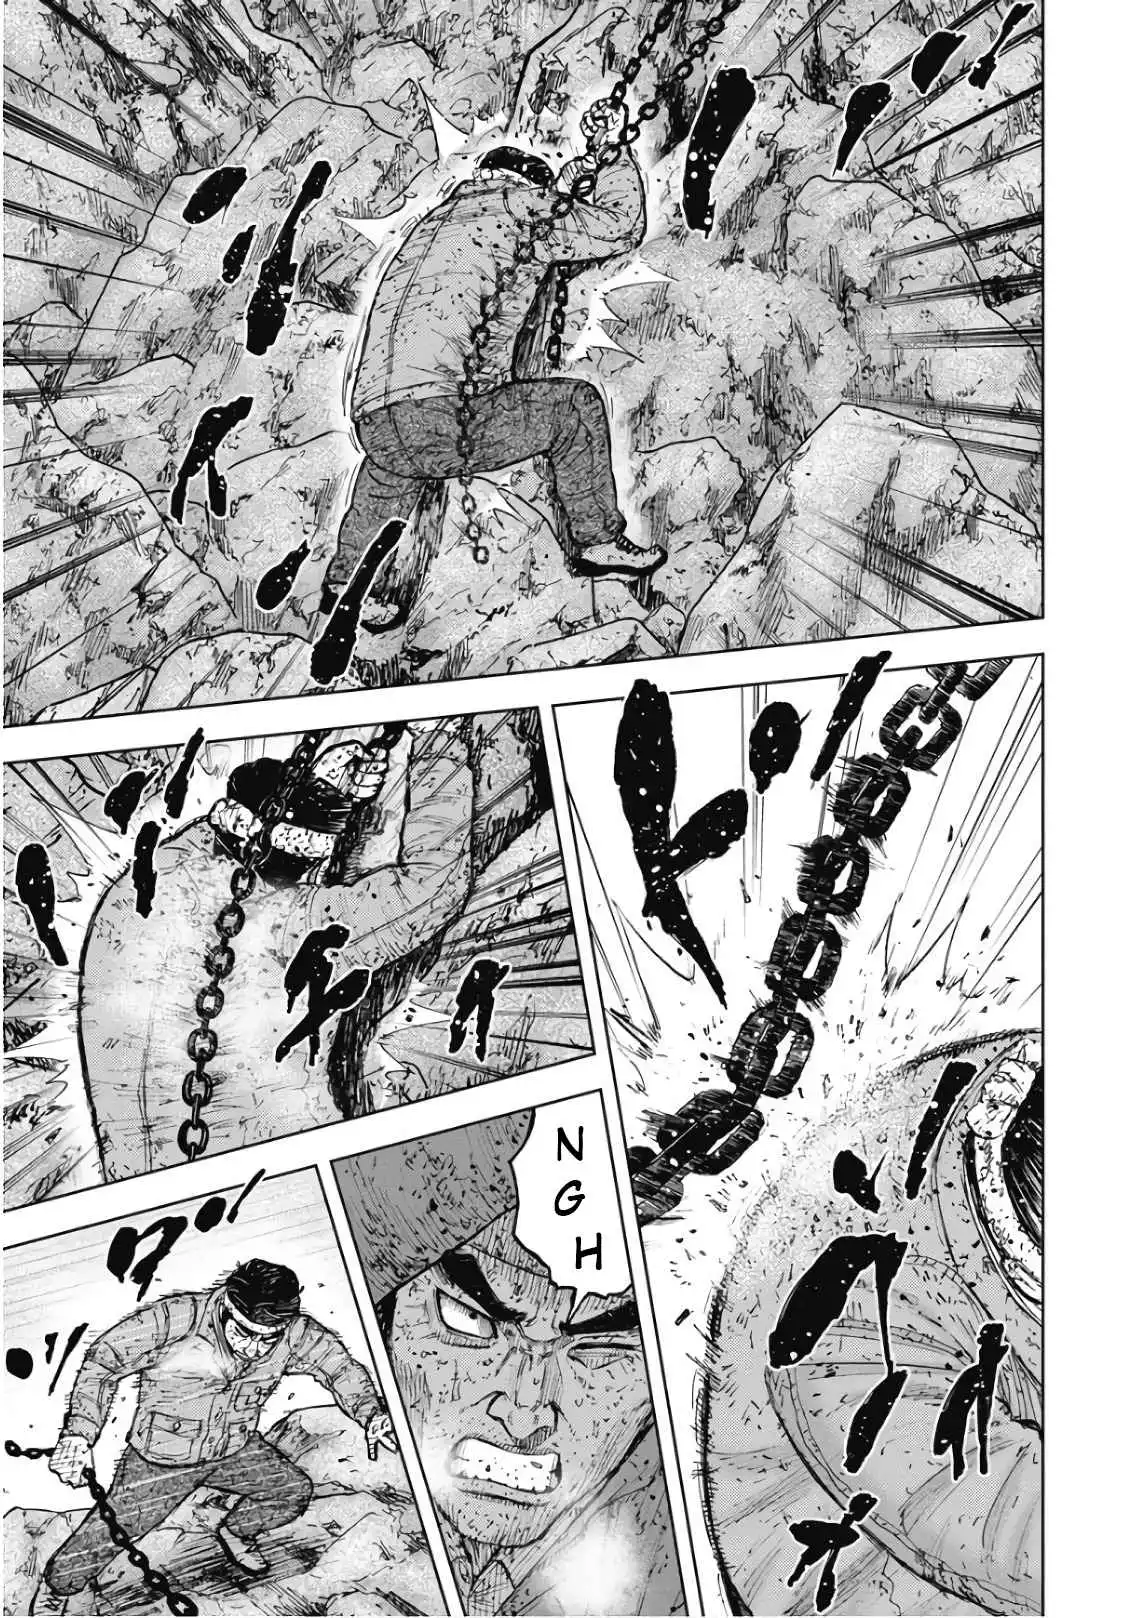 Monkey Peak [ALL CHAPTERS] Chapter 100